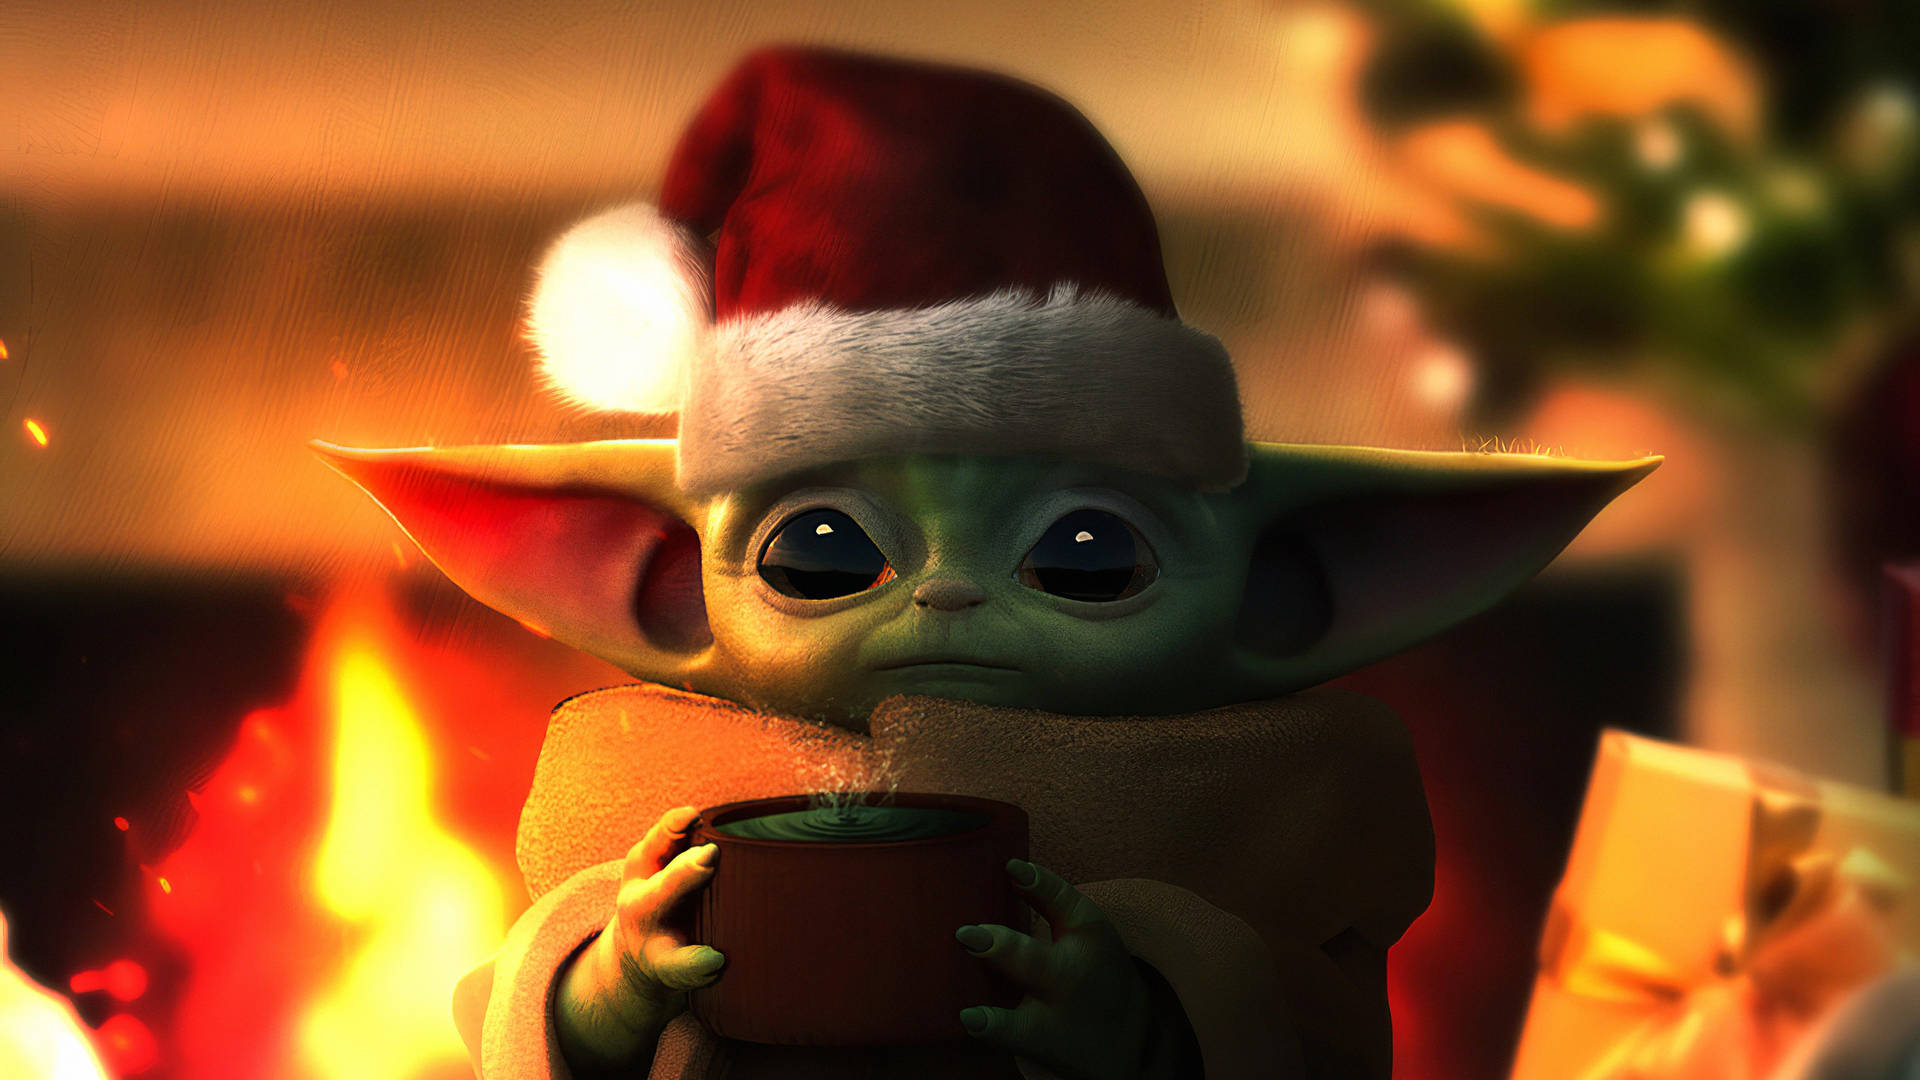 Its all about hot cocoa and cookies on Christmas 4K wallpaper download